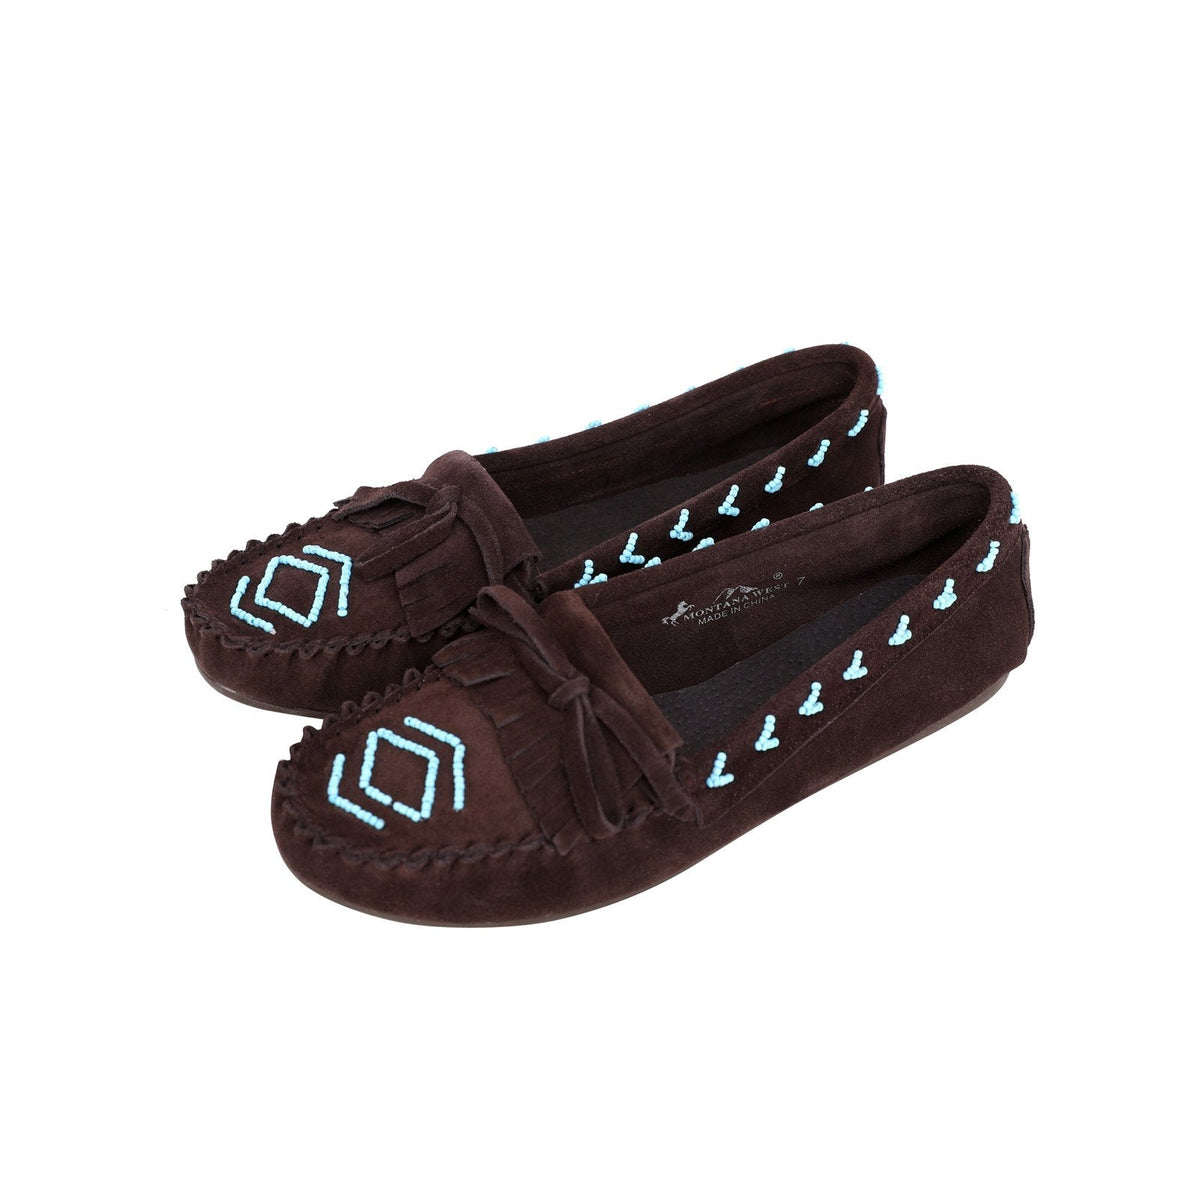 Leather Suede Moccasin Slipper Beaded Accents - Cowgirl Wear